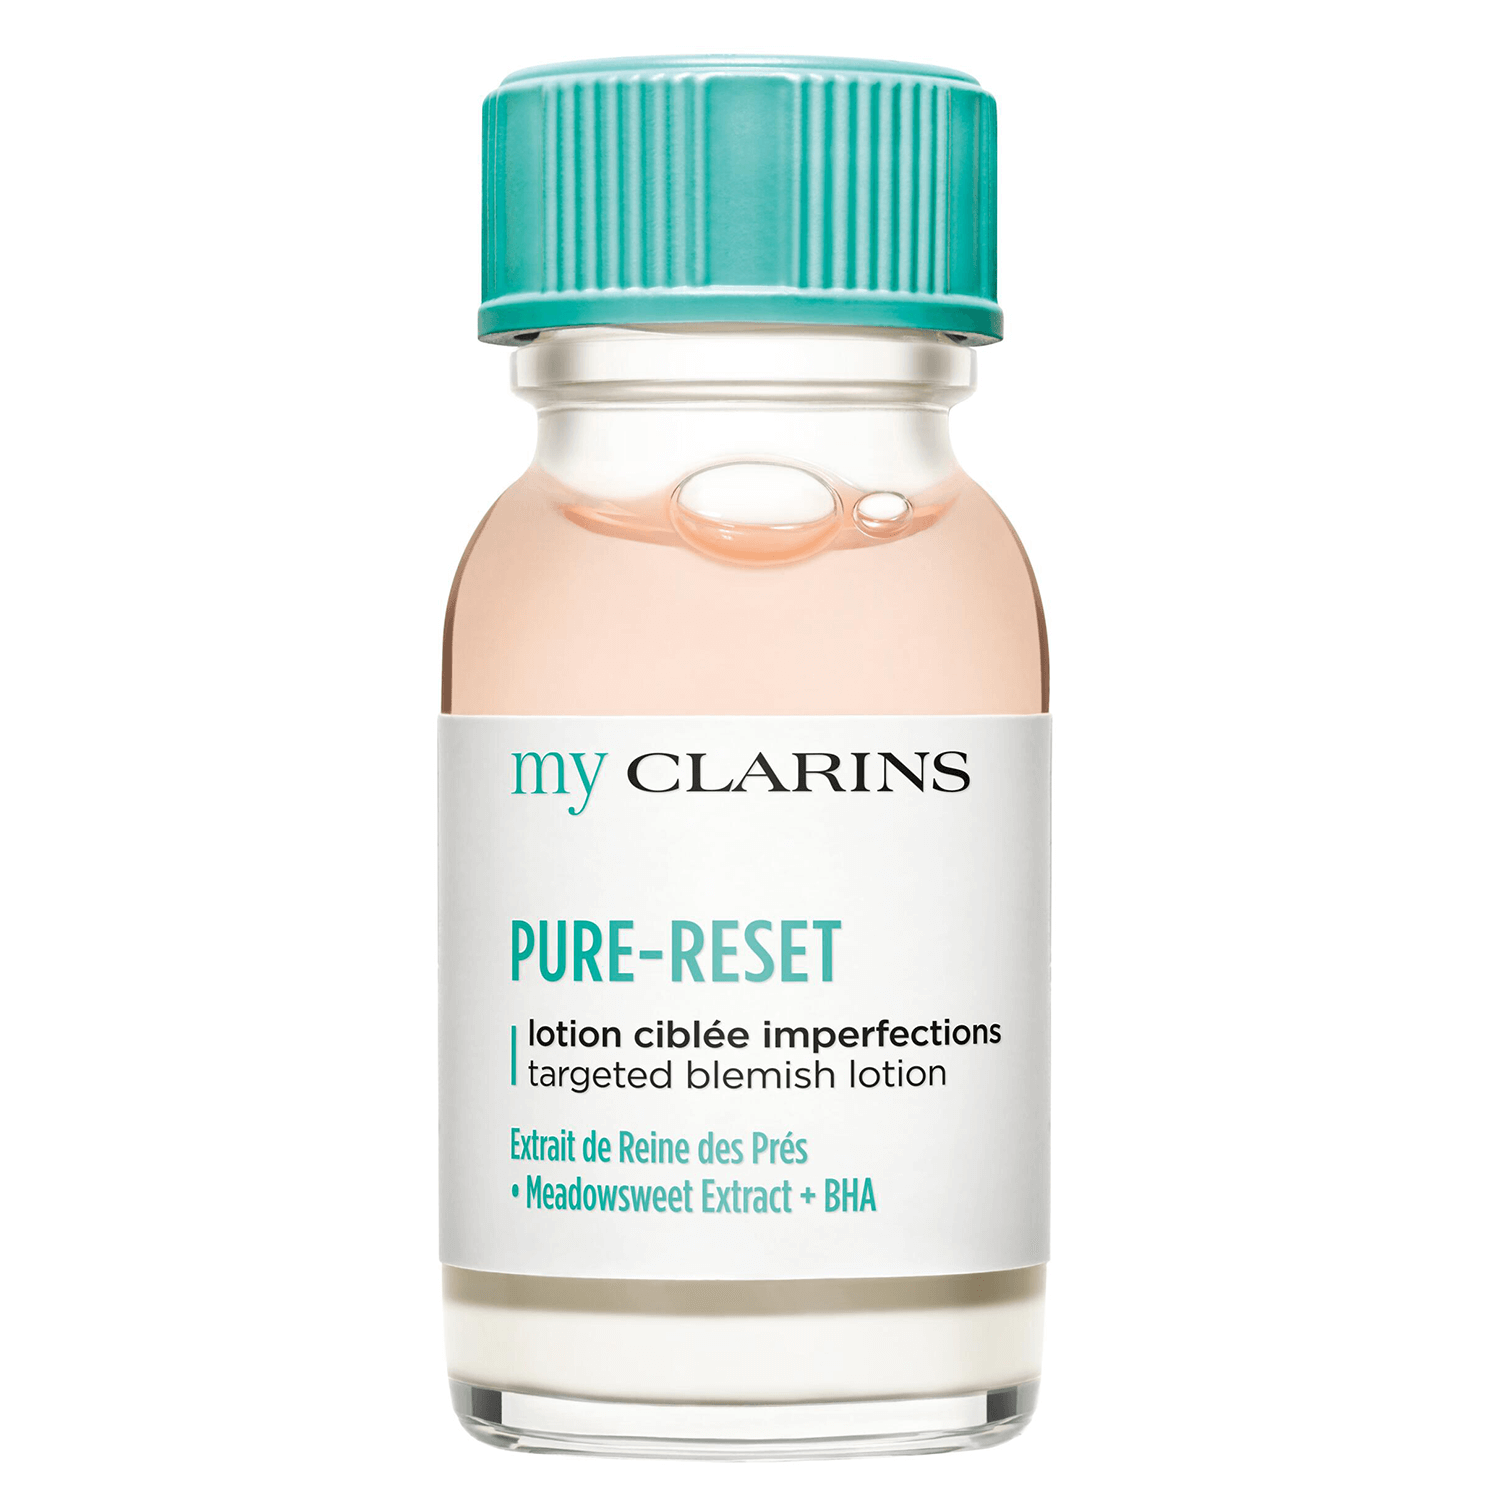 Product image from myClarins - PURE-RESET targeted blemish lotion